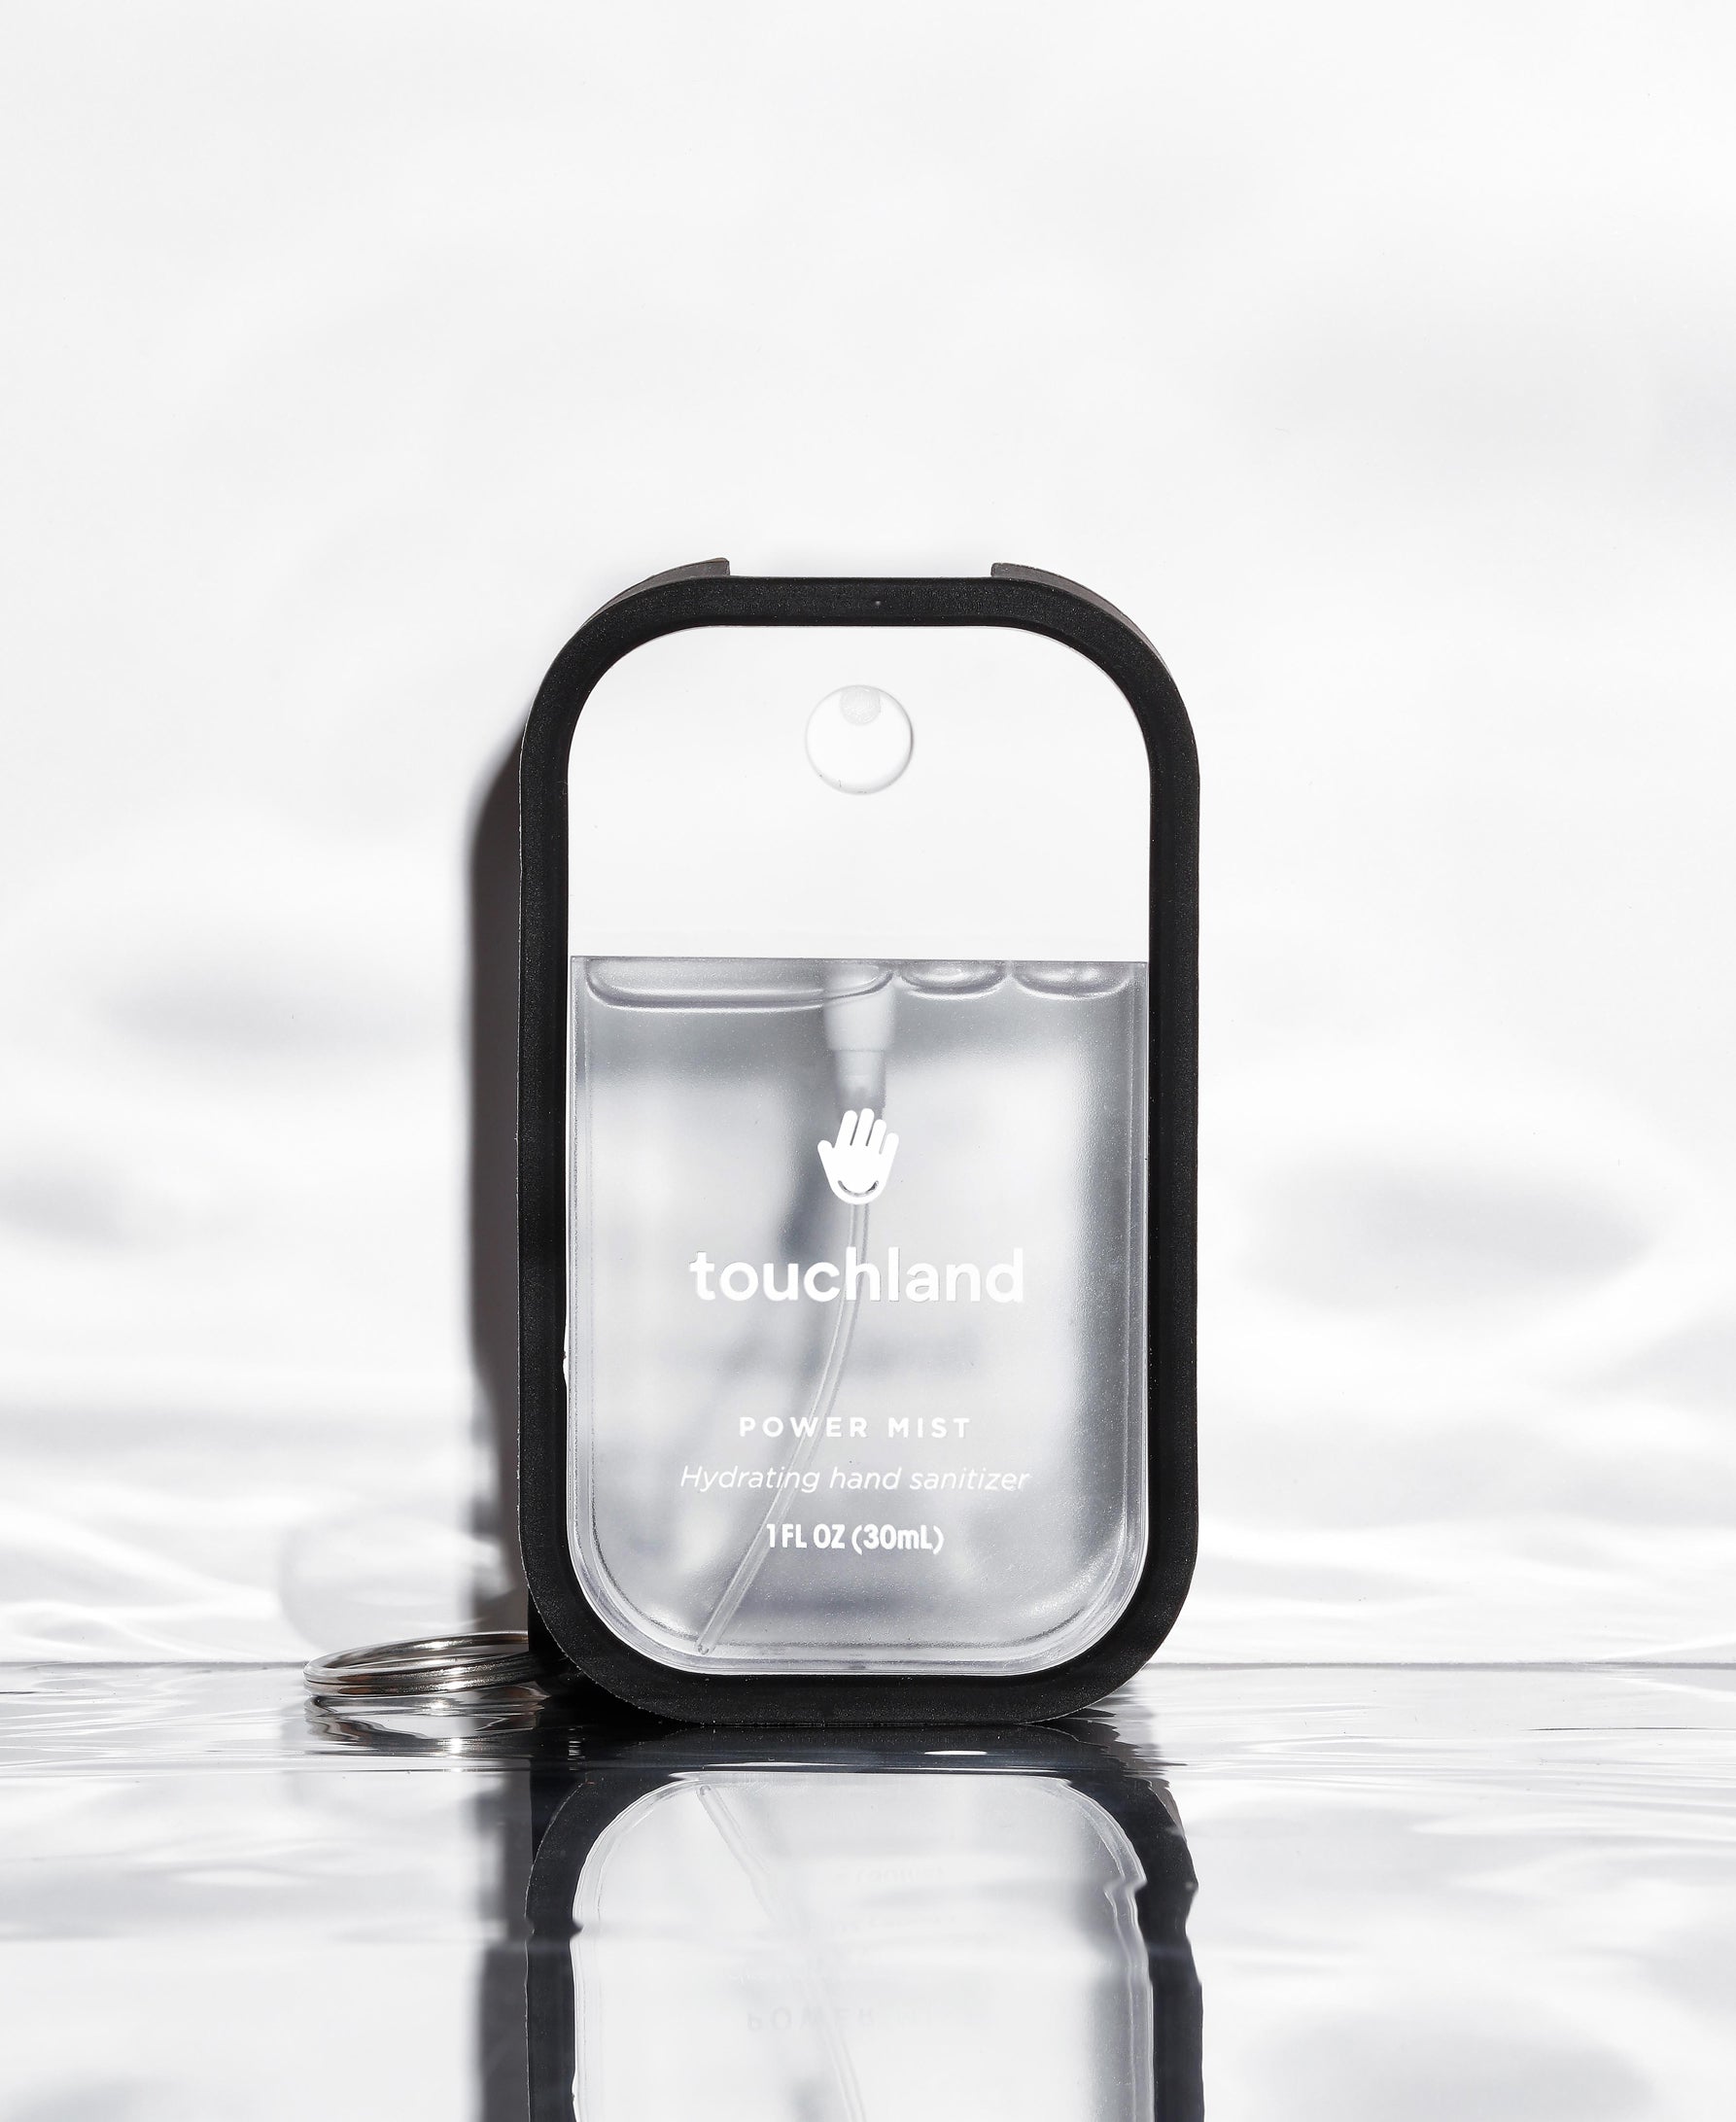 Touchland clear unscented power mist in black mist case on white background